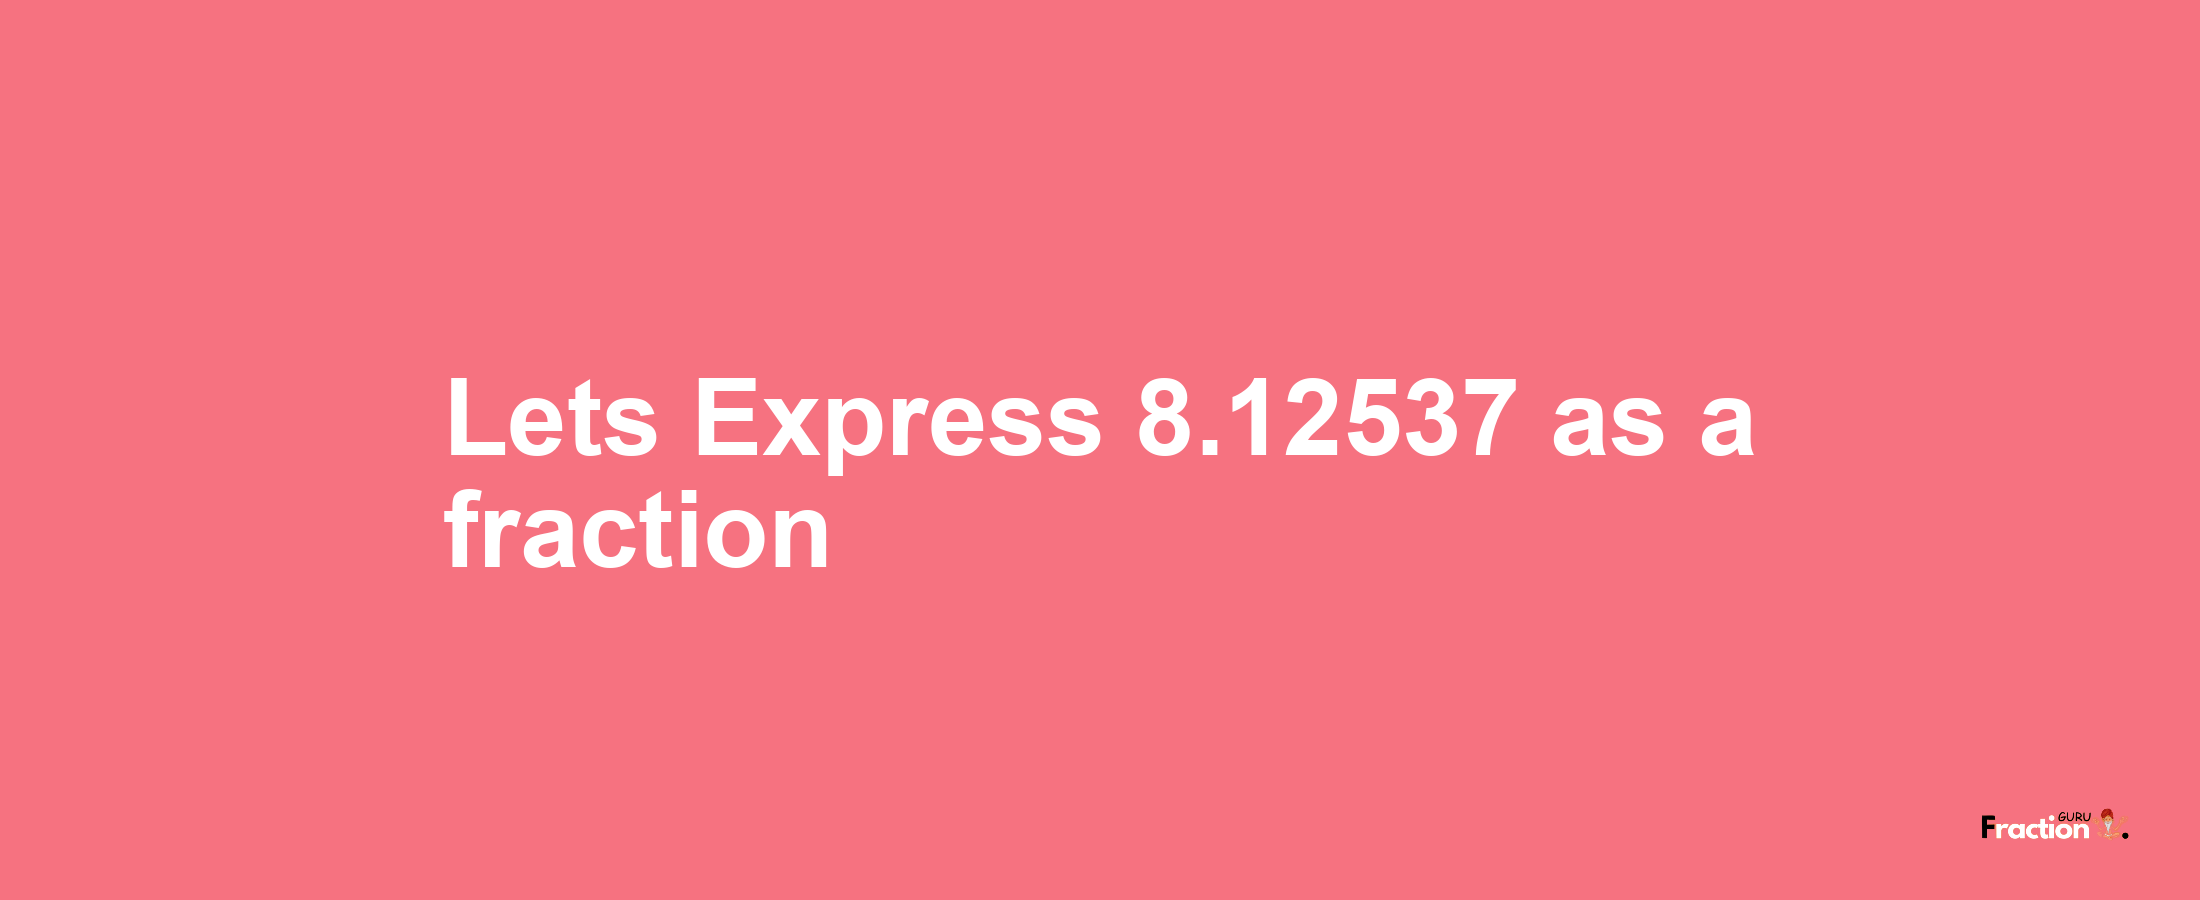 Lets Express 8.12537 as afraction